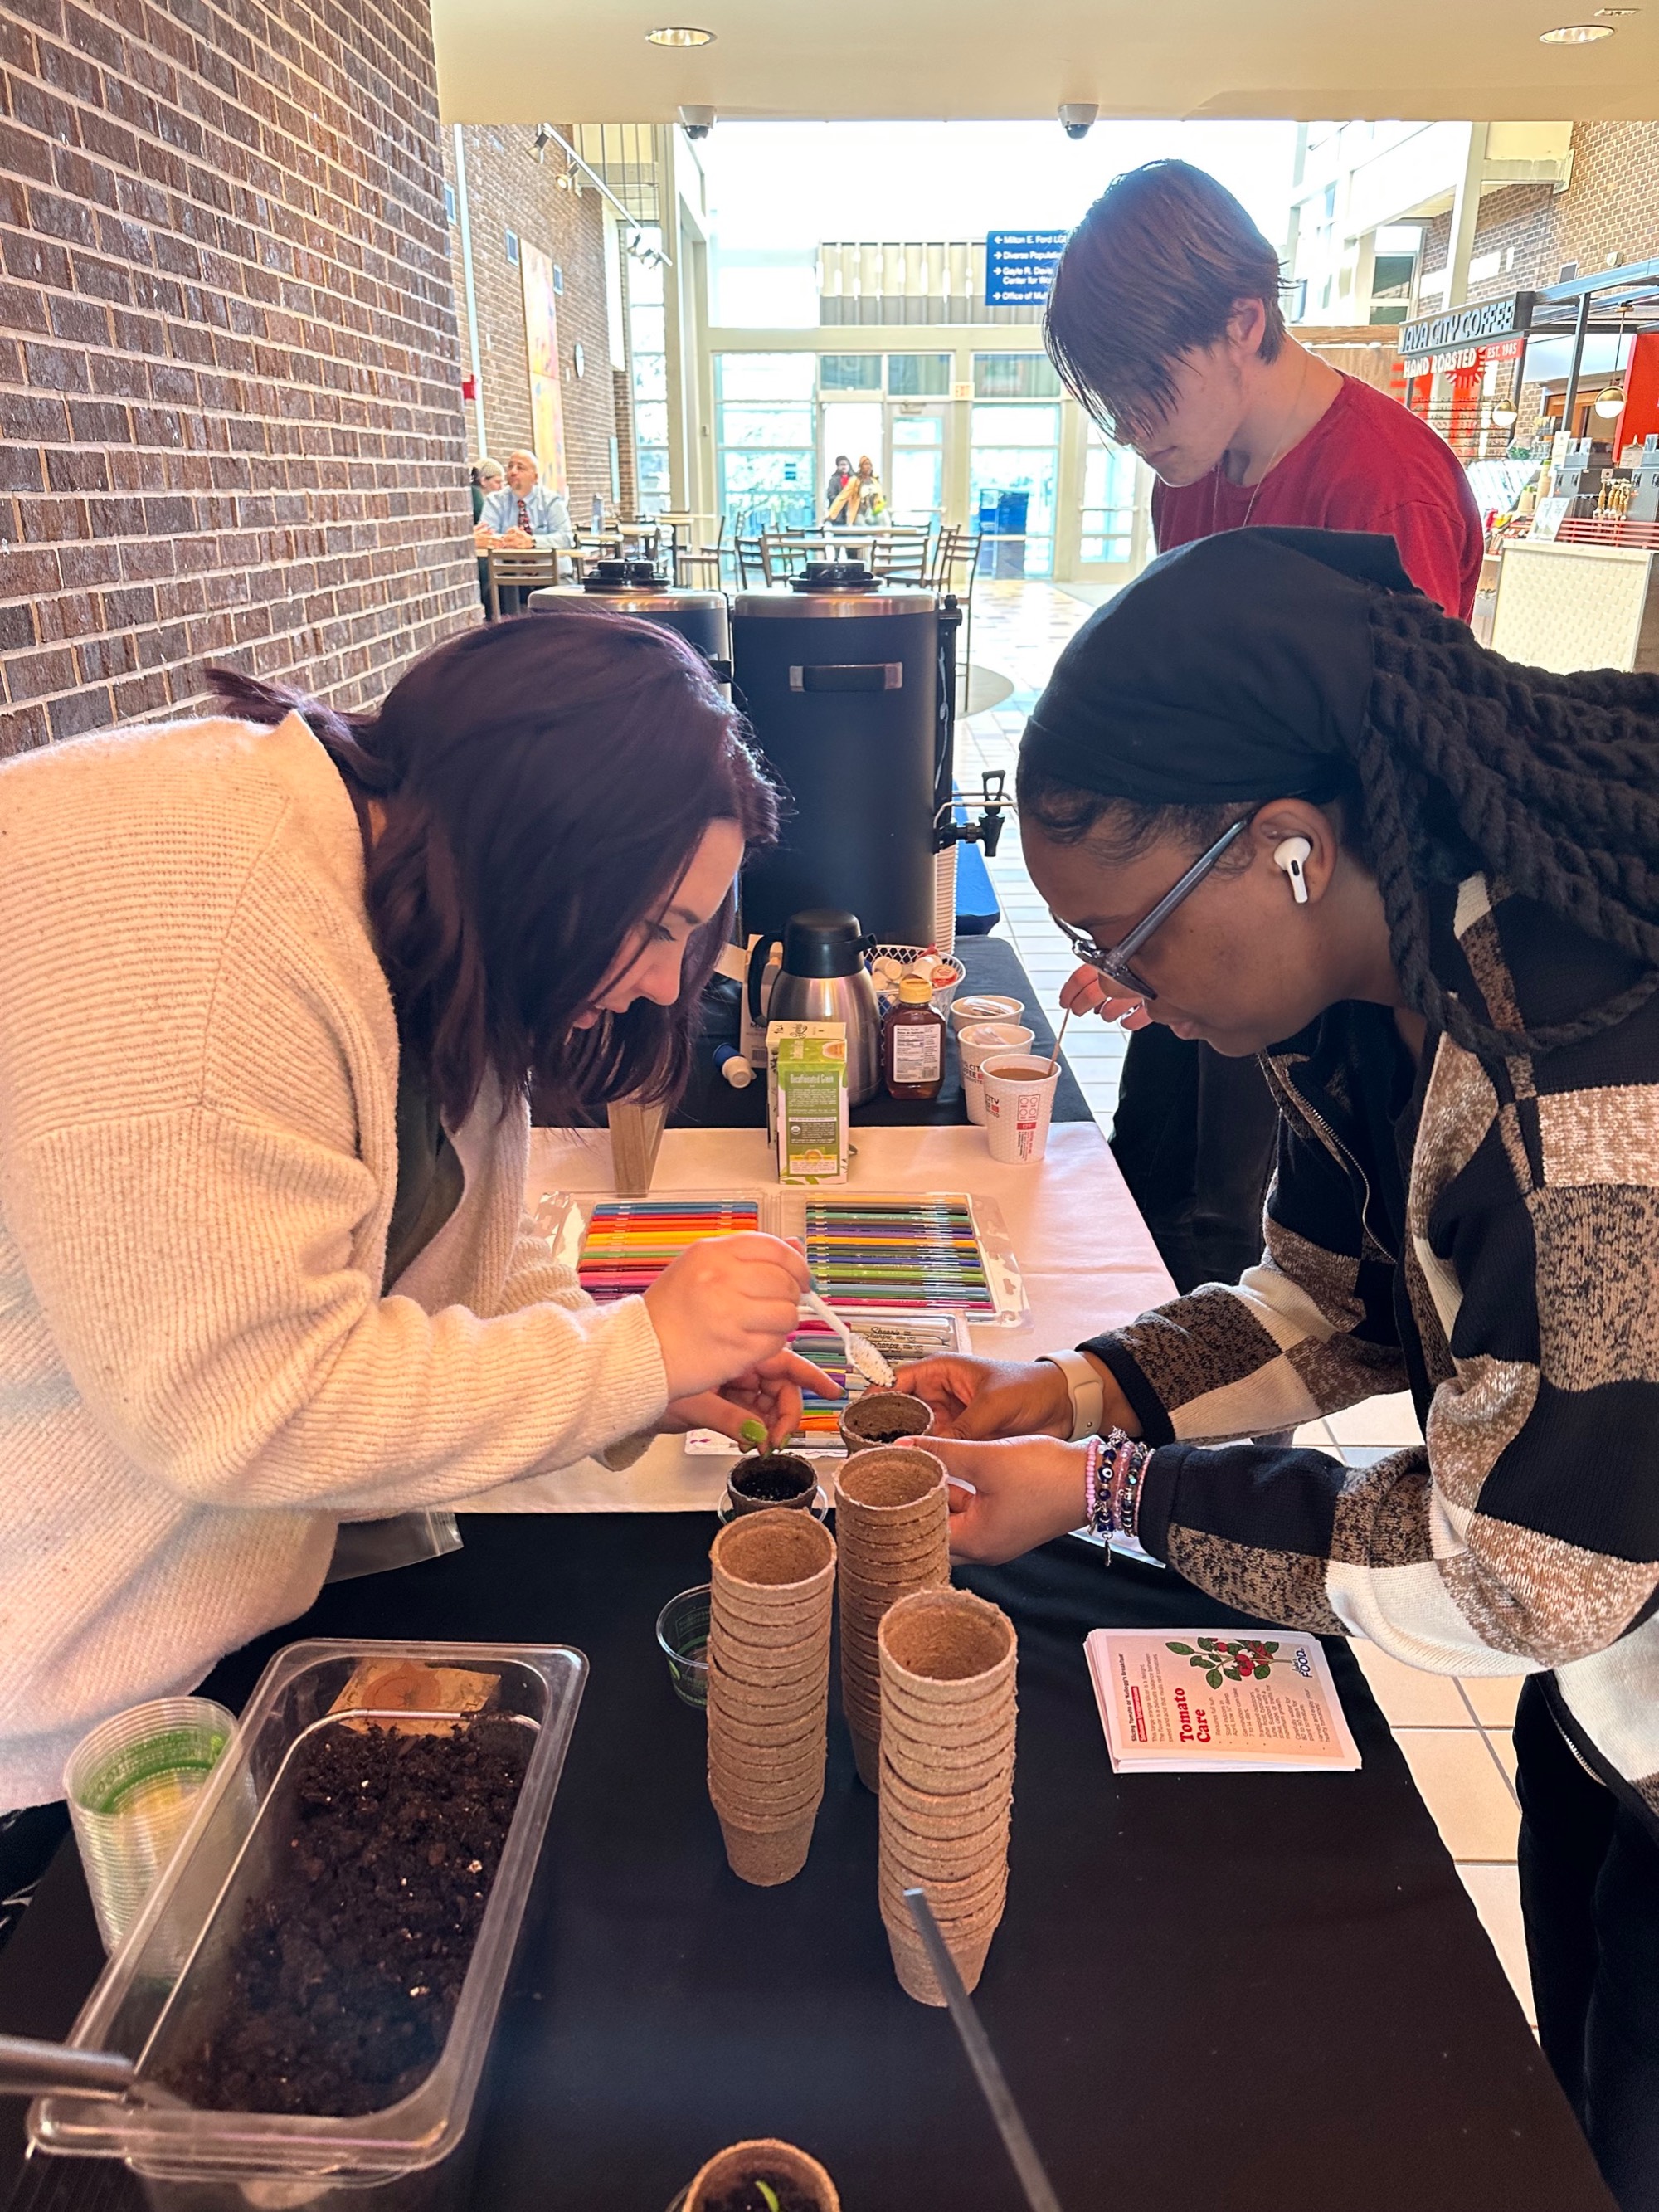 Students plant tomato seeds for earth day